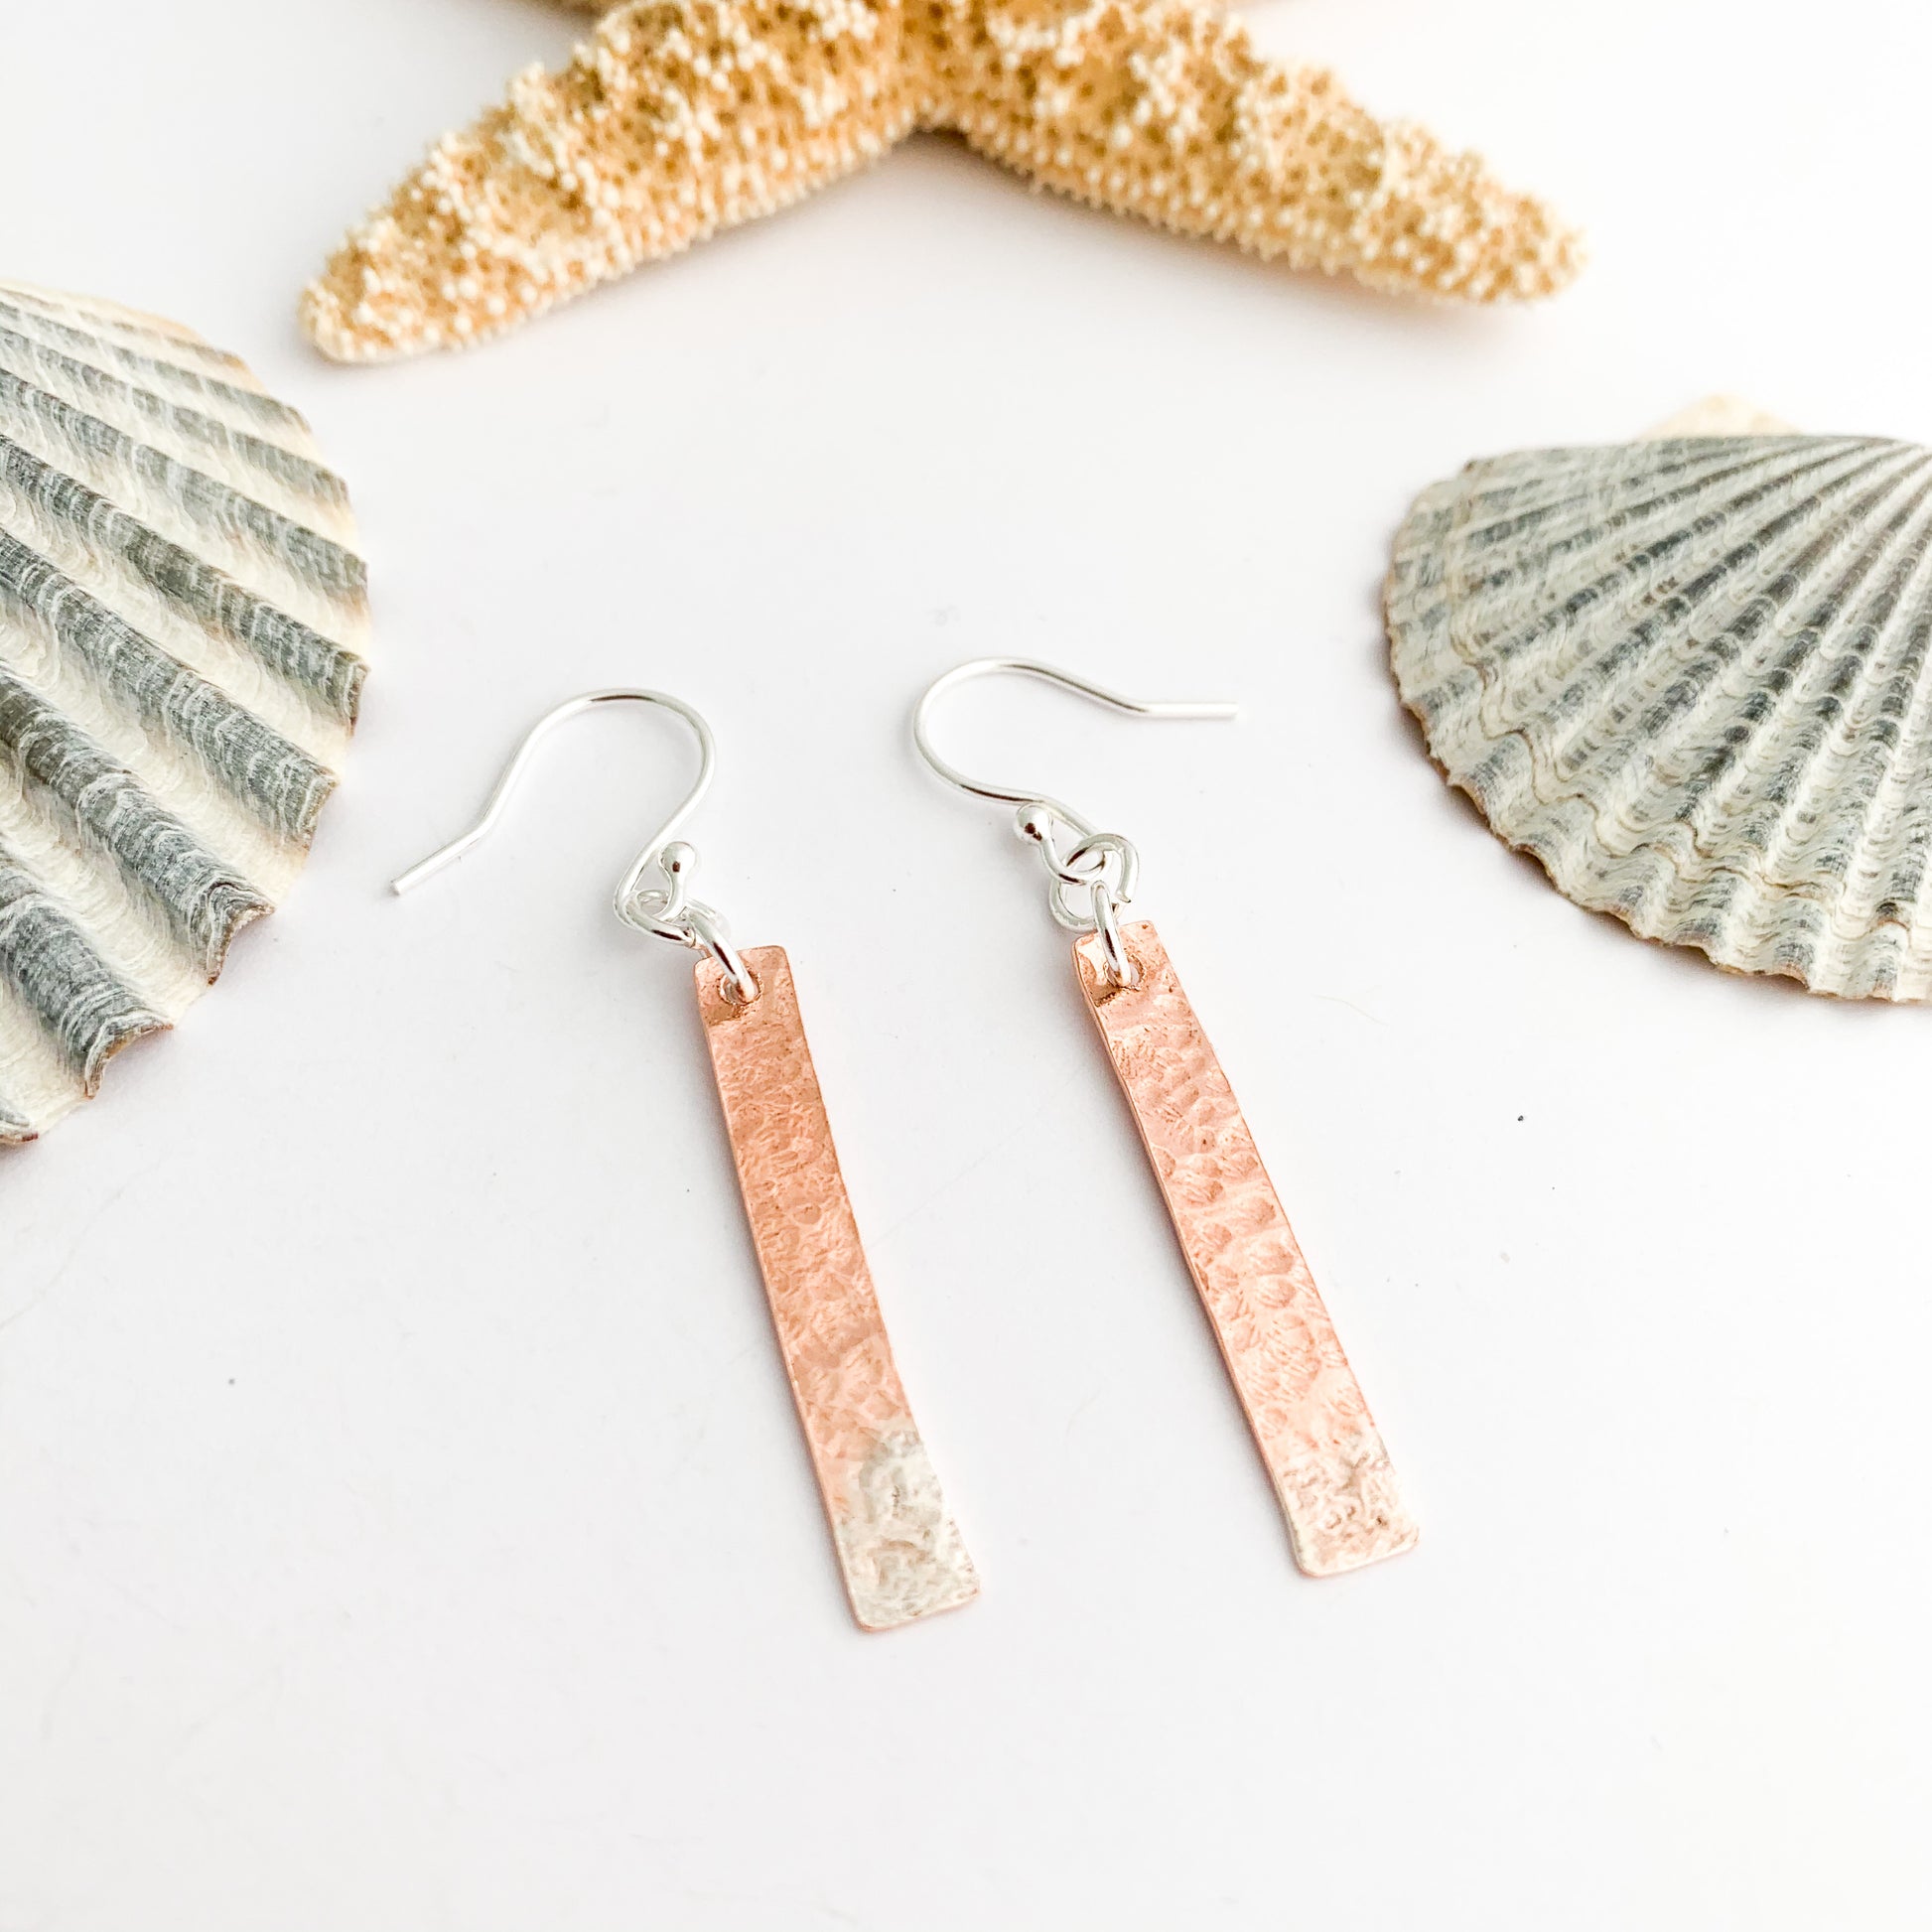 Copper and Sterling Silver Stick Earrings